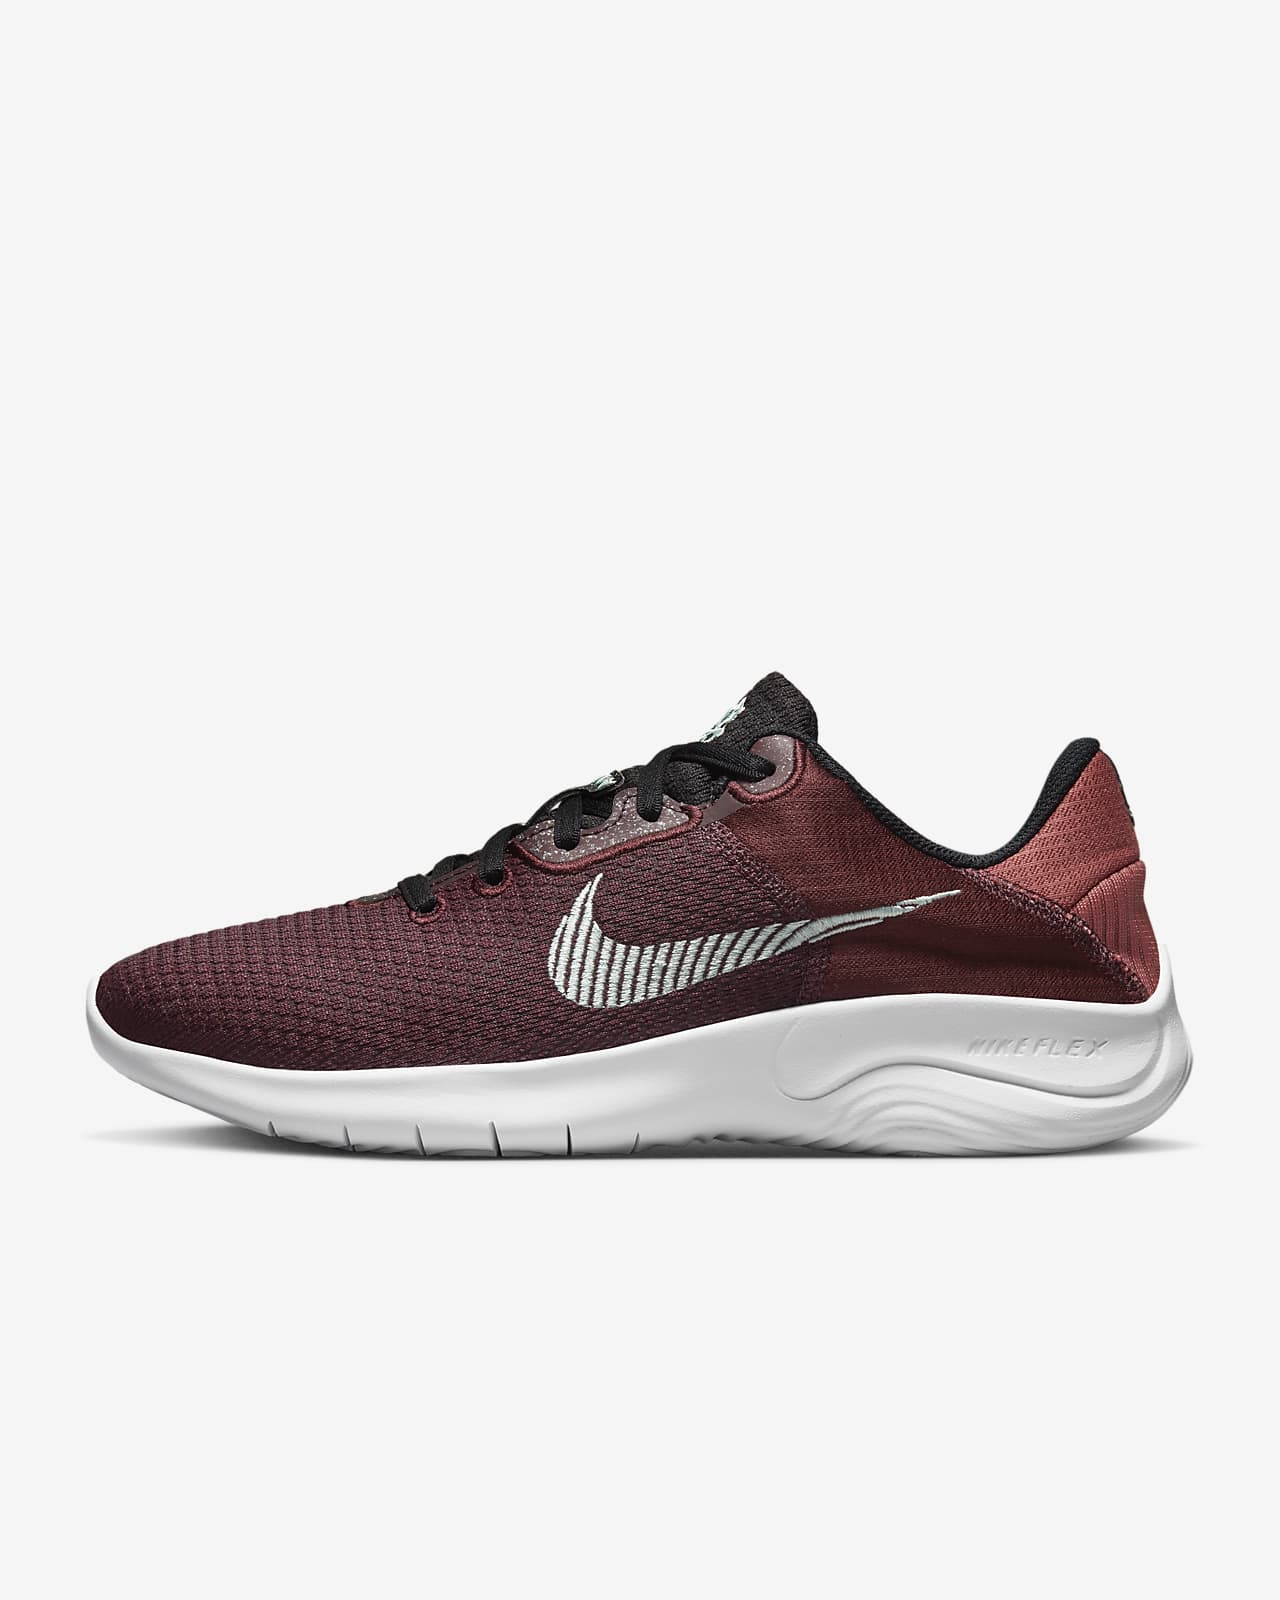 Nike Experience 11 Road Running Shoes. ID